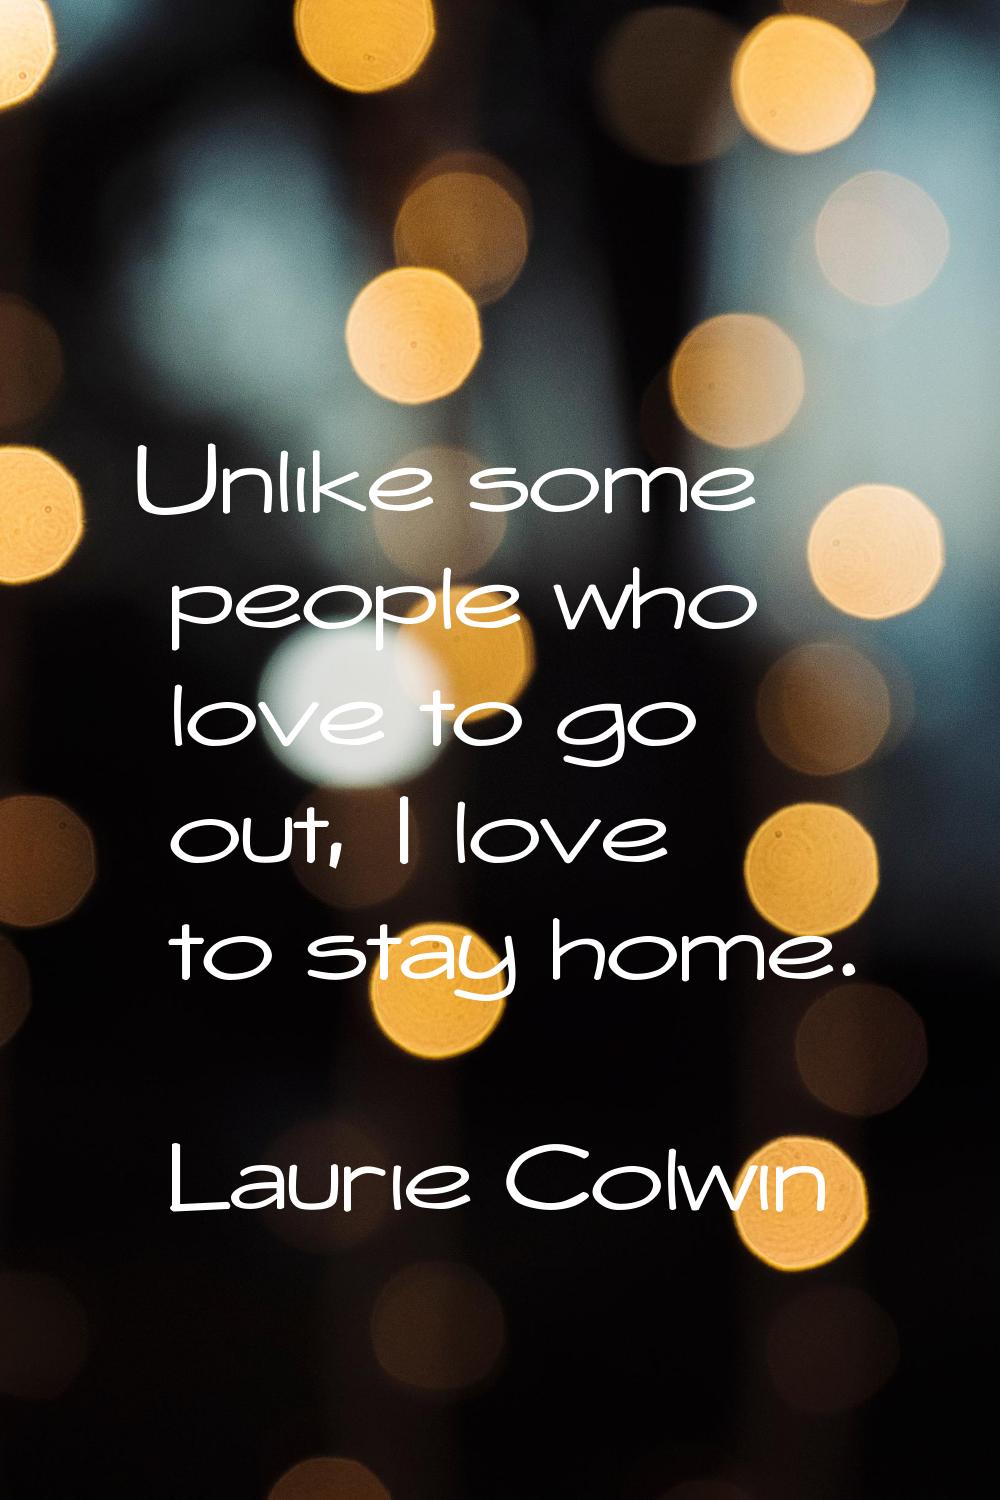 Unlike some people who love to go out, I love to stay home.